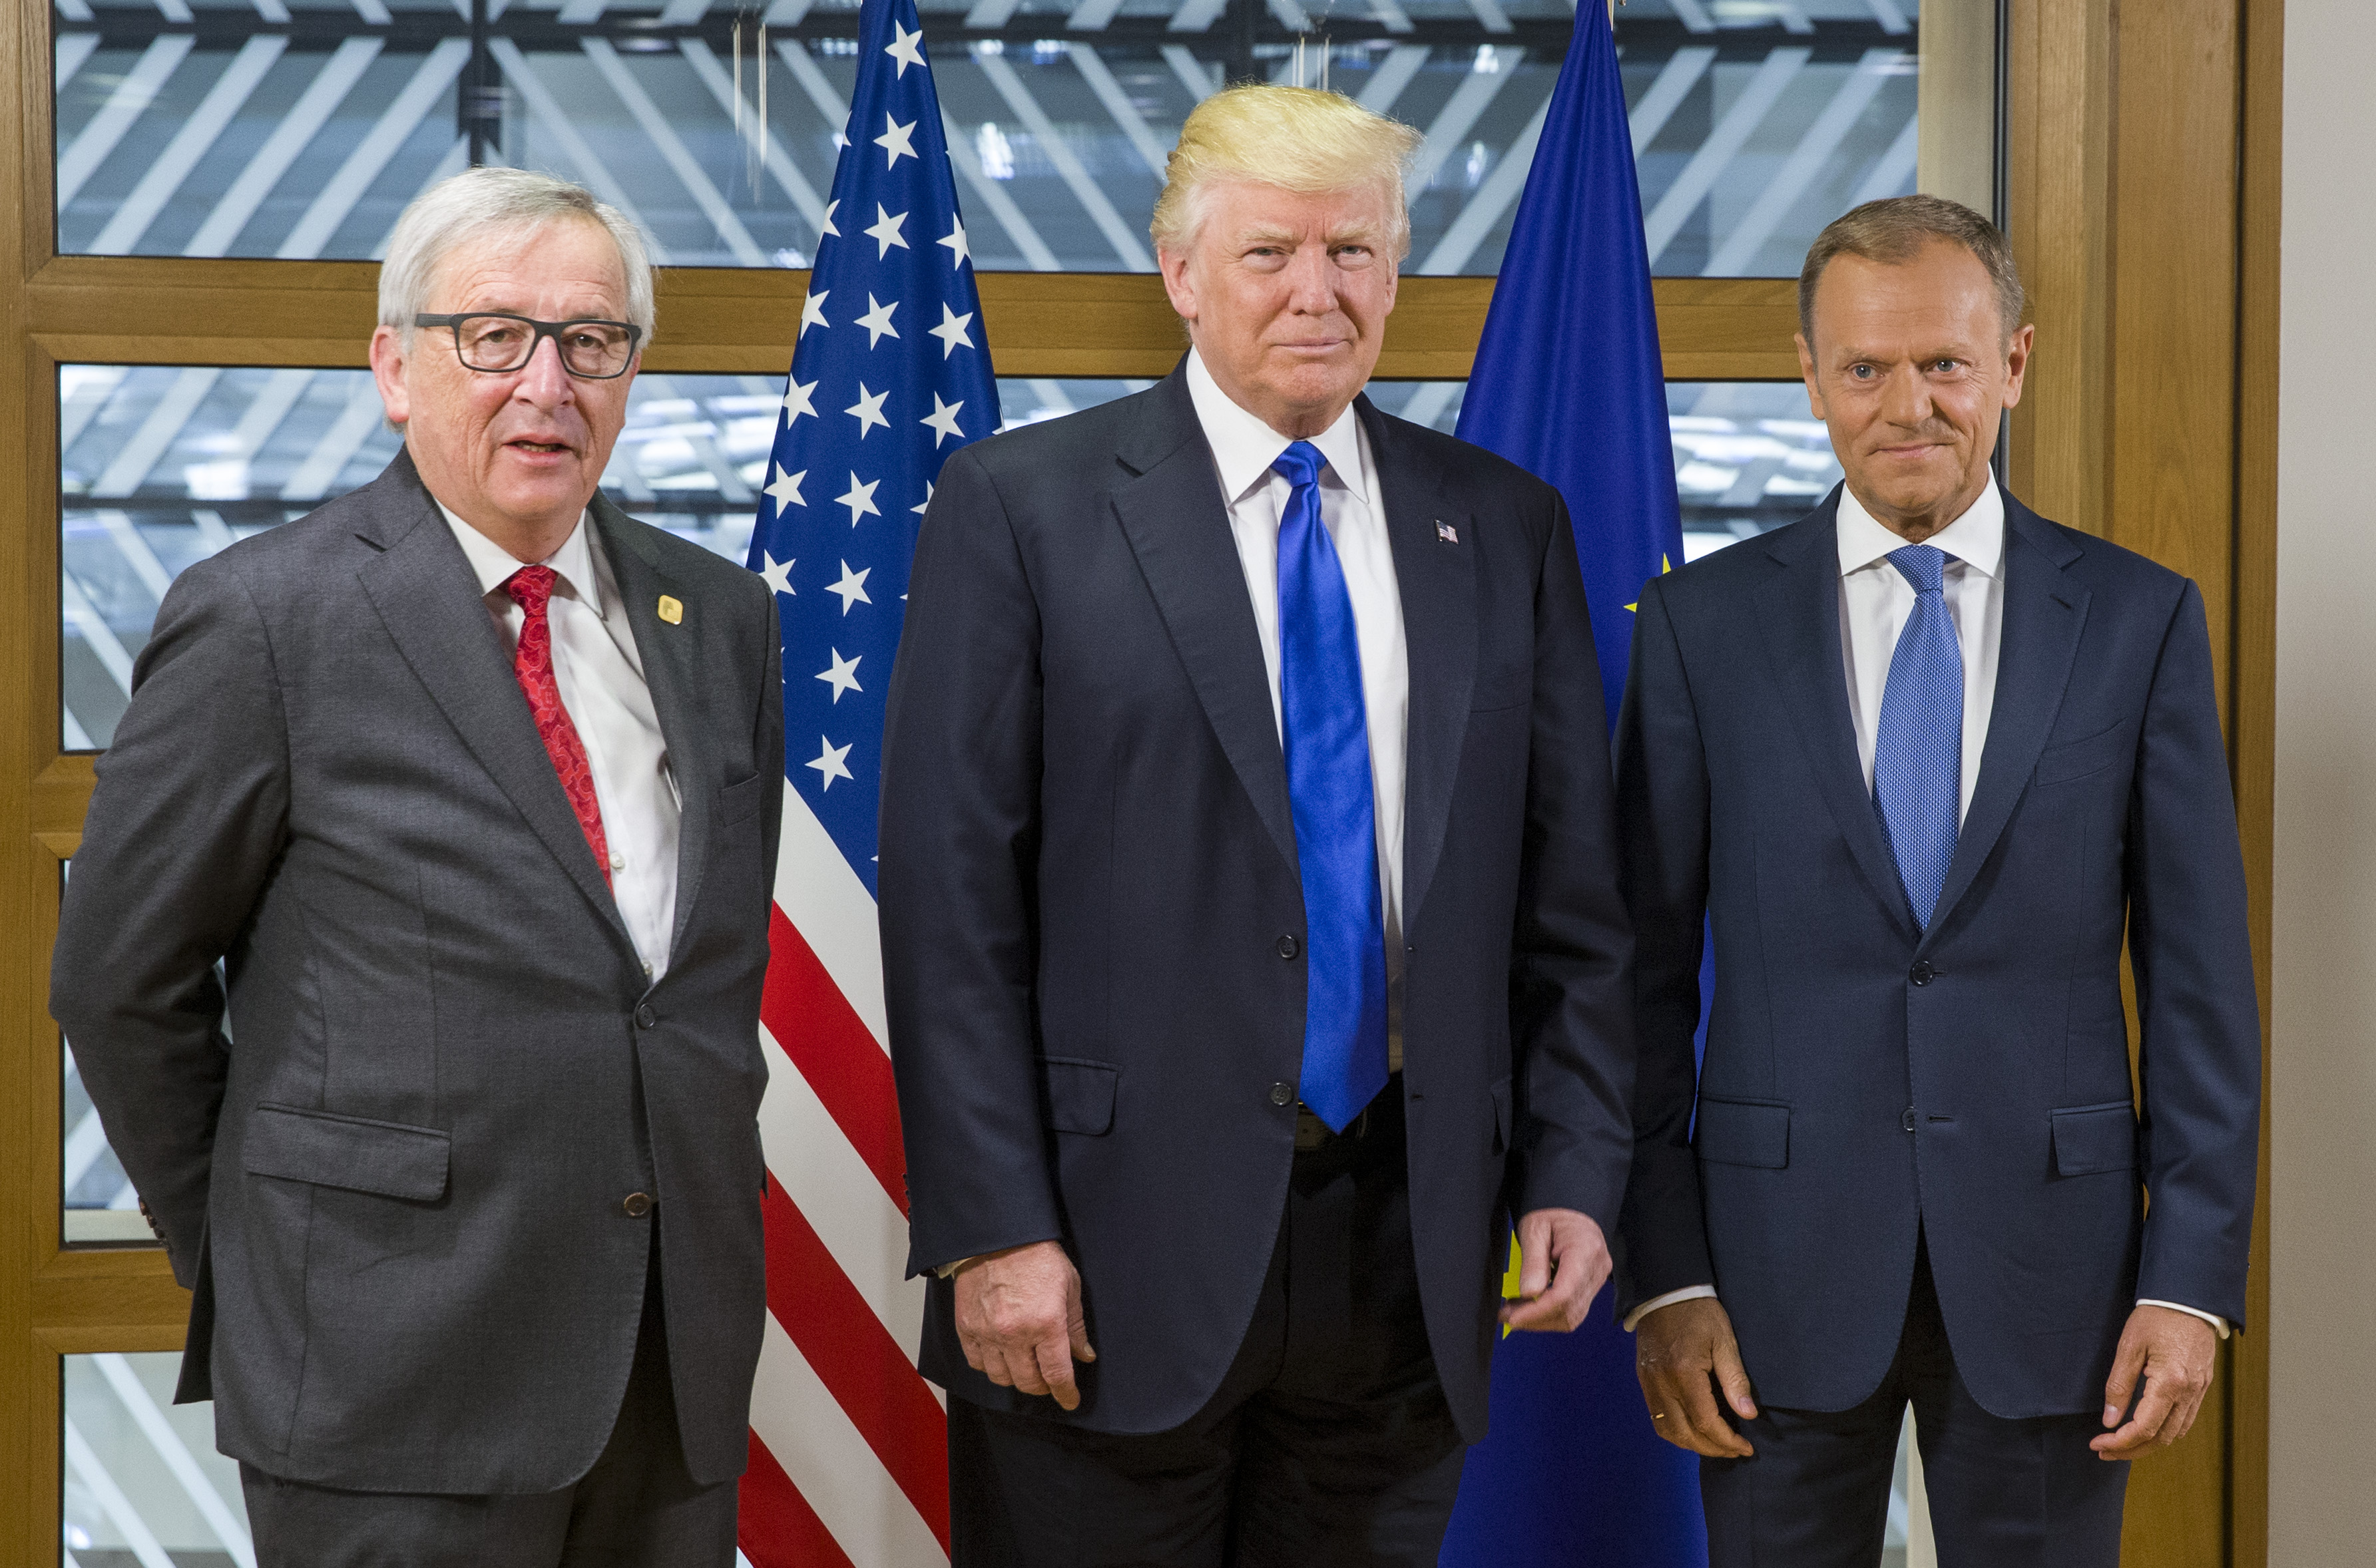 EU leaders discuss counter-terrorism, security issues with Trump